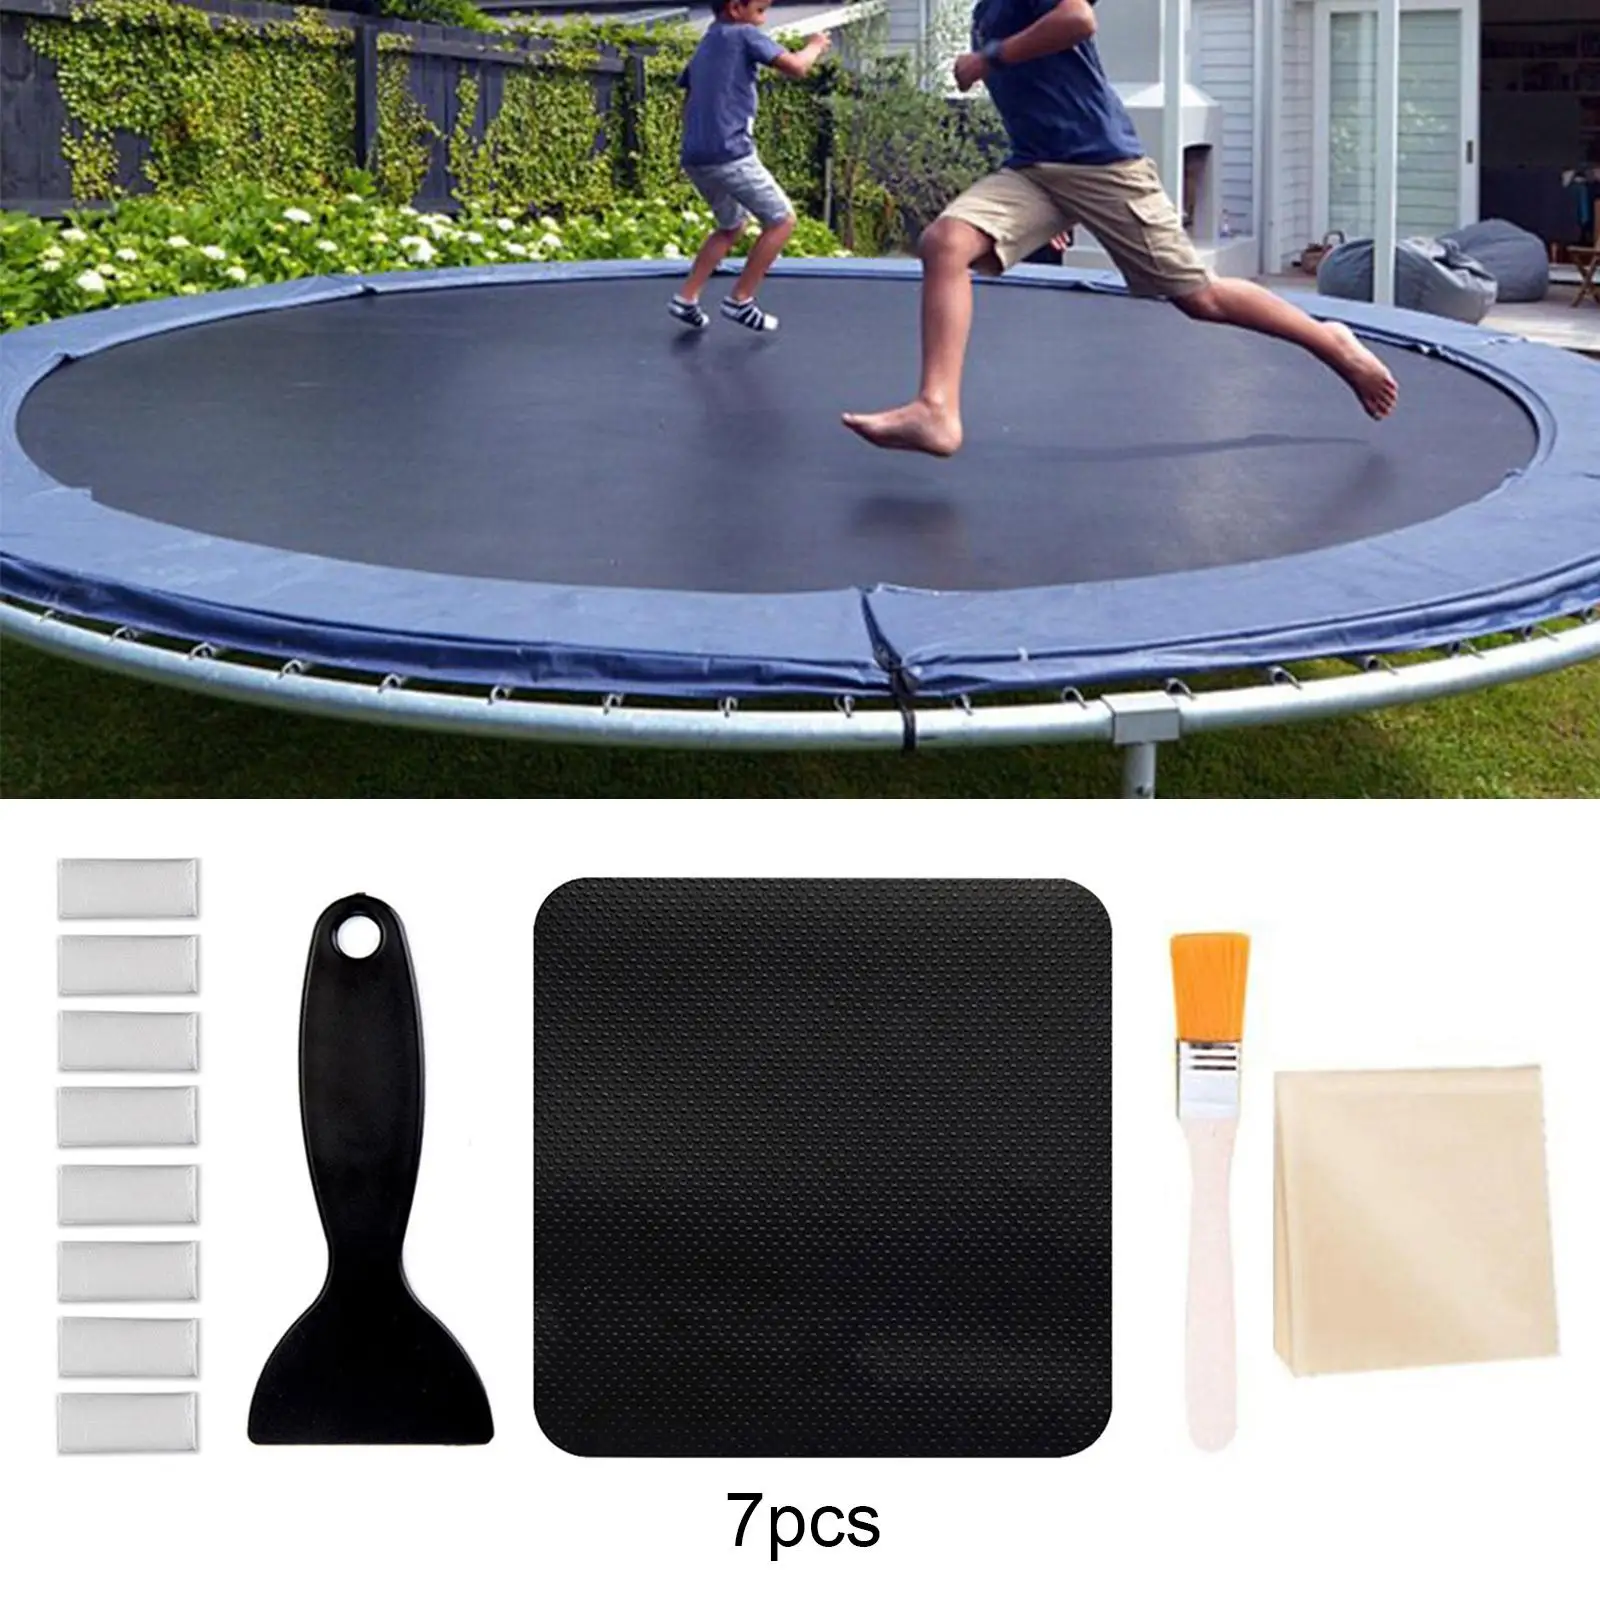 Trampoline Repair Patches 4 x 4 Sports Accessories Waterproof Fixing Pad Net Repair for Tent Trampoline Trampoline Mat Patches